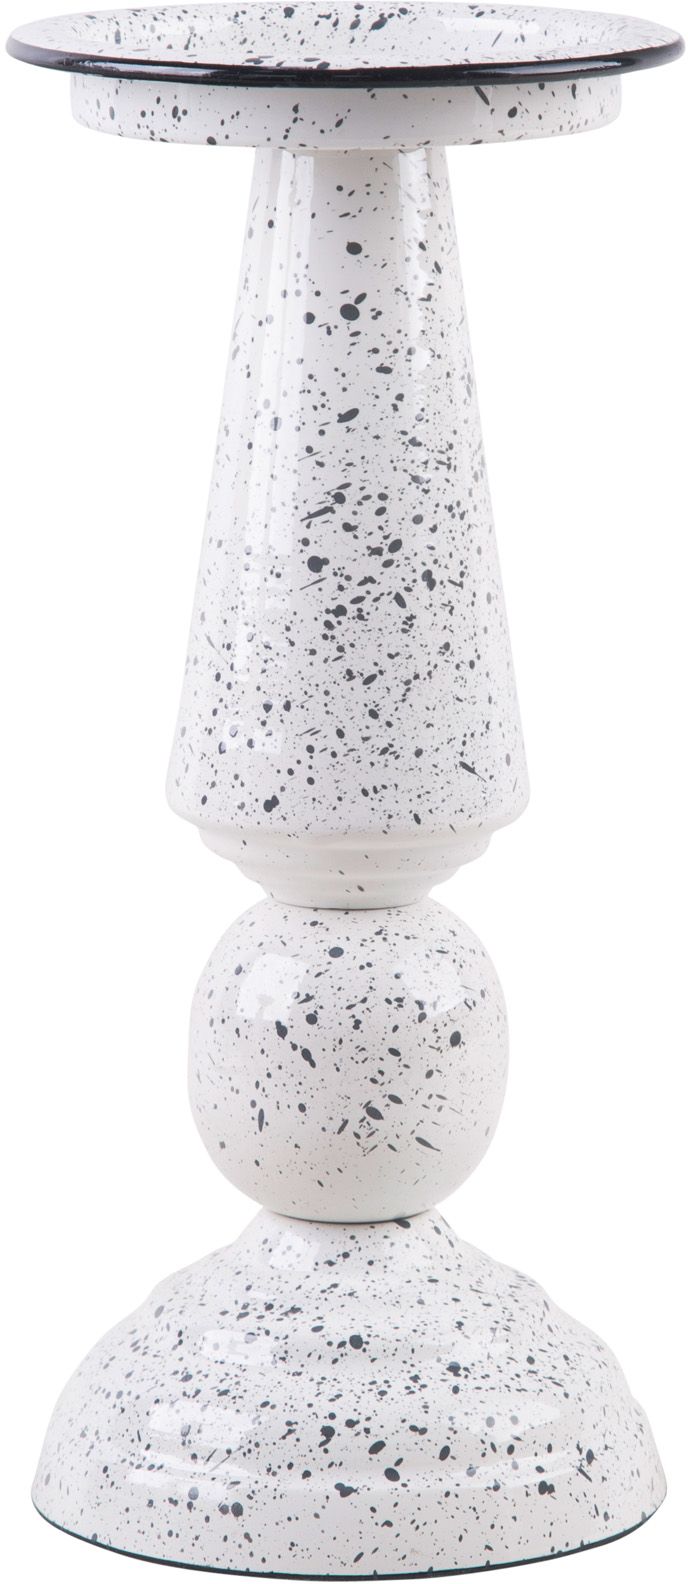 10"H SPECKLED WHITE CANDLE HOLDER